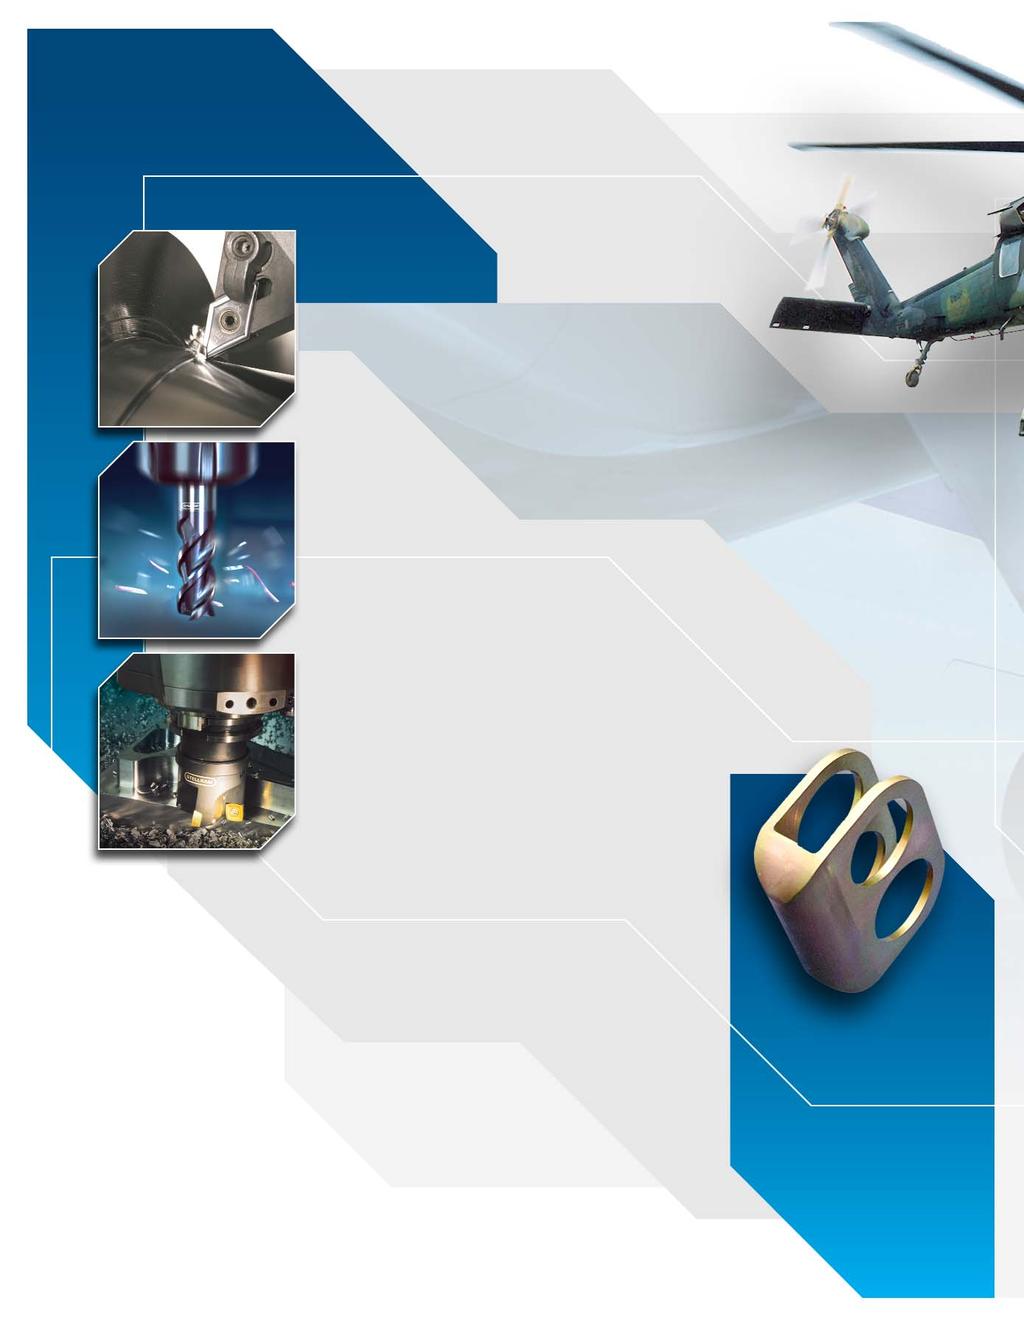 Mission Critical Metallics 4E Turning Geometry ATIʼs innovative specialty metals solutions are used in the critical components of airframes, jet engines, landing gear, hydraulic tubing, fasteners and